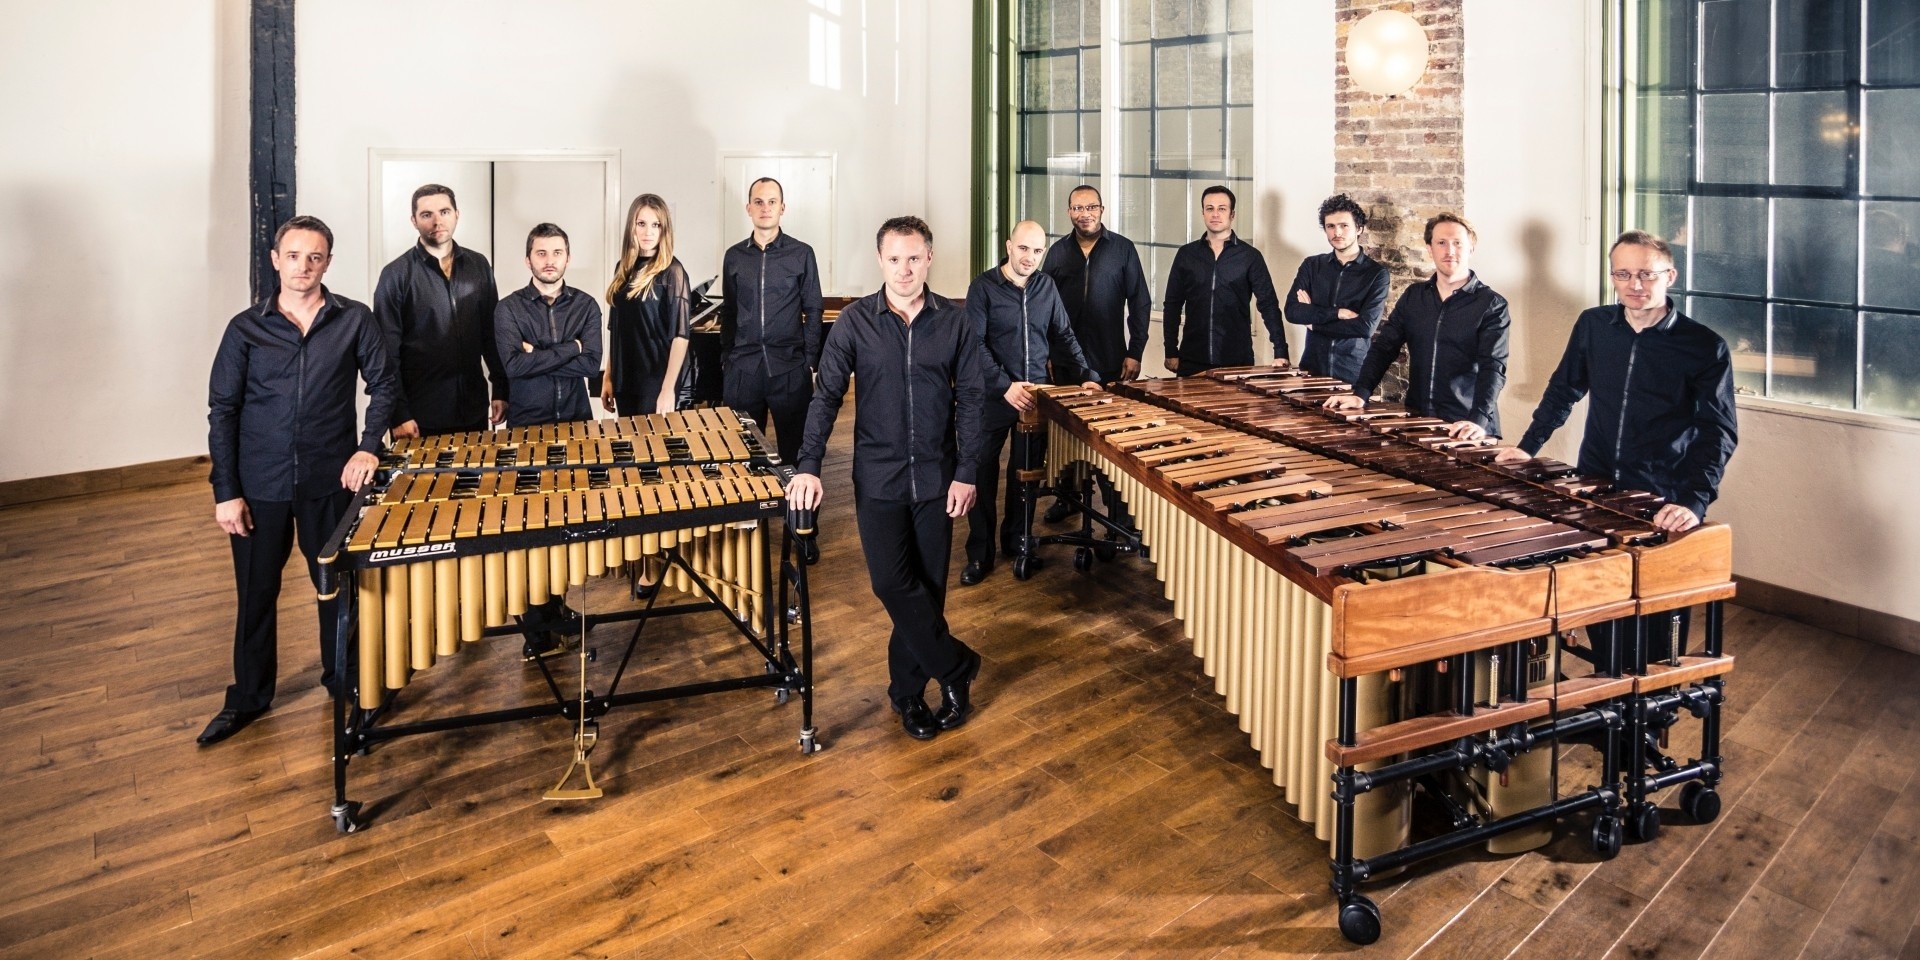 The Colin Currie Group to perform Steve Reich's selected works, including Drumming, at the Esplanade Concert Hall 